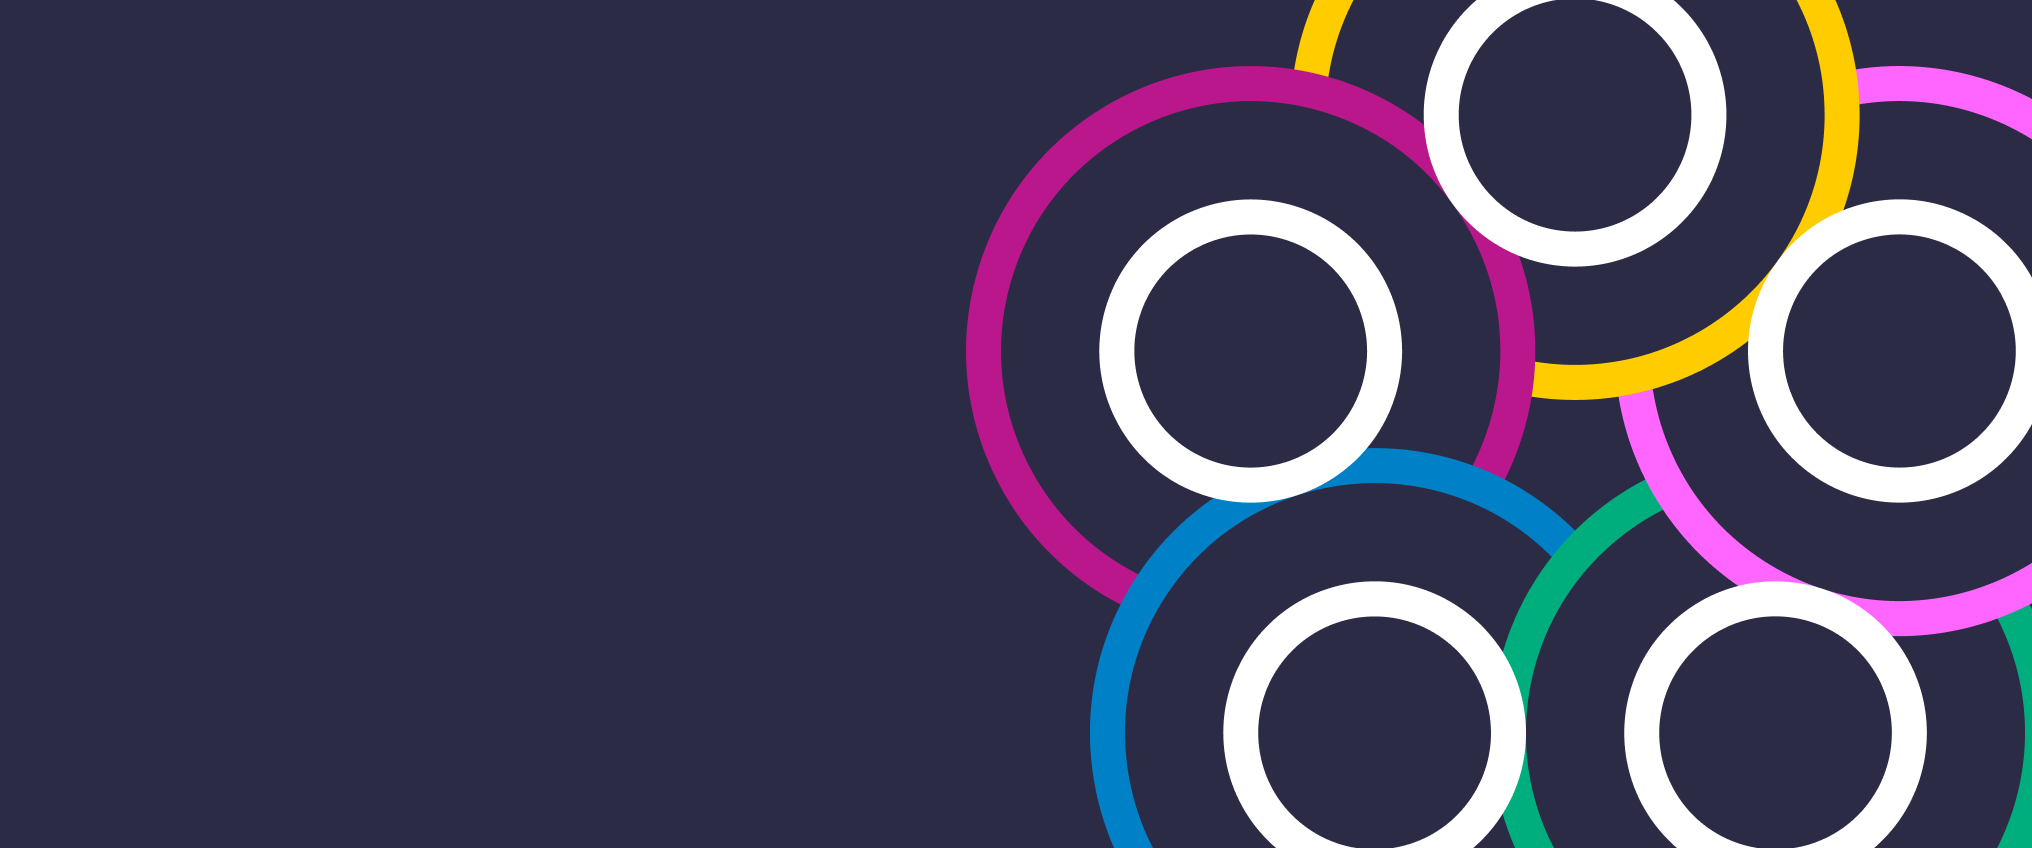 Coloured circles in a pattern which form Universal policy goals logo